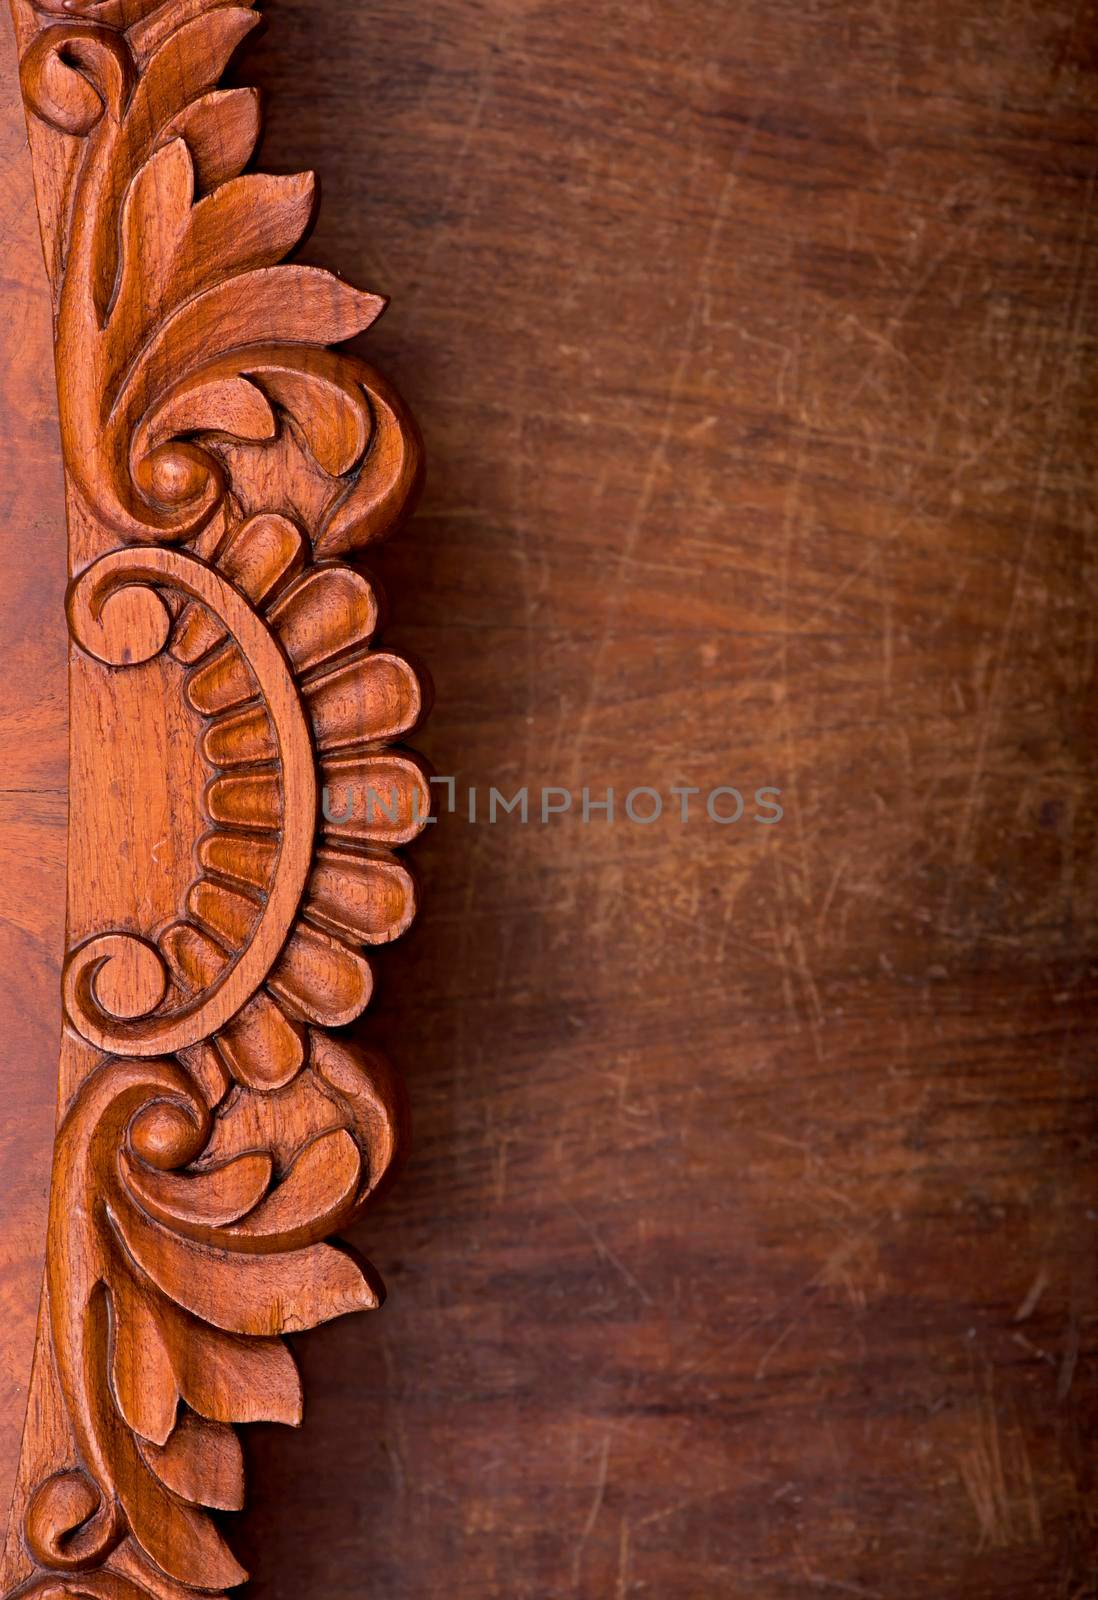 element of carved antique furniture. abstract brown wood background by aprilphoto